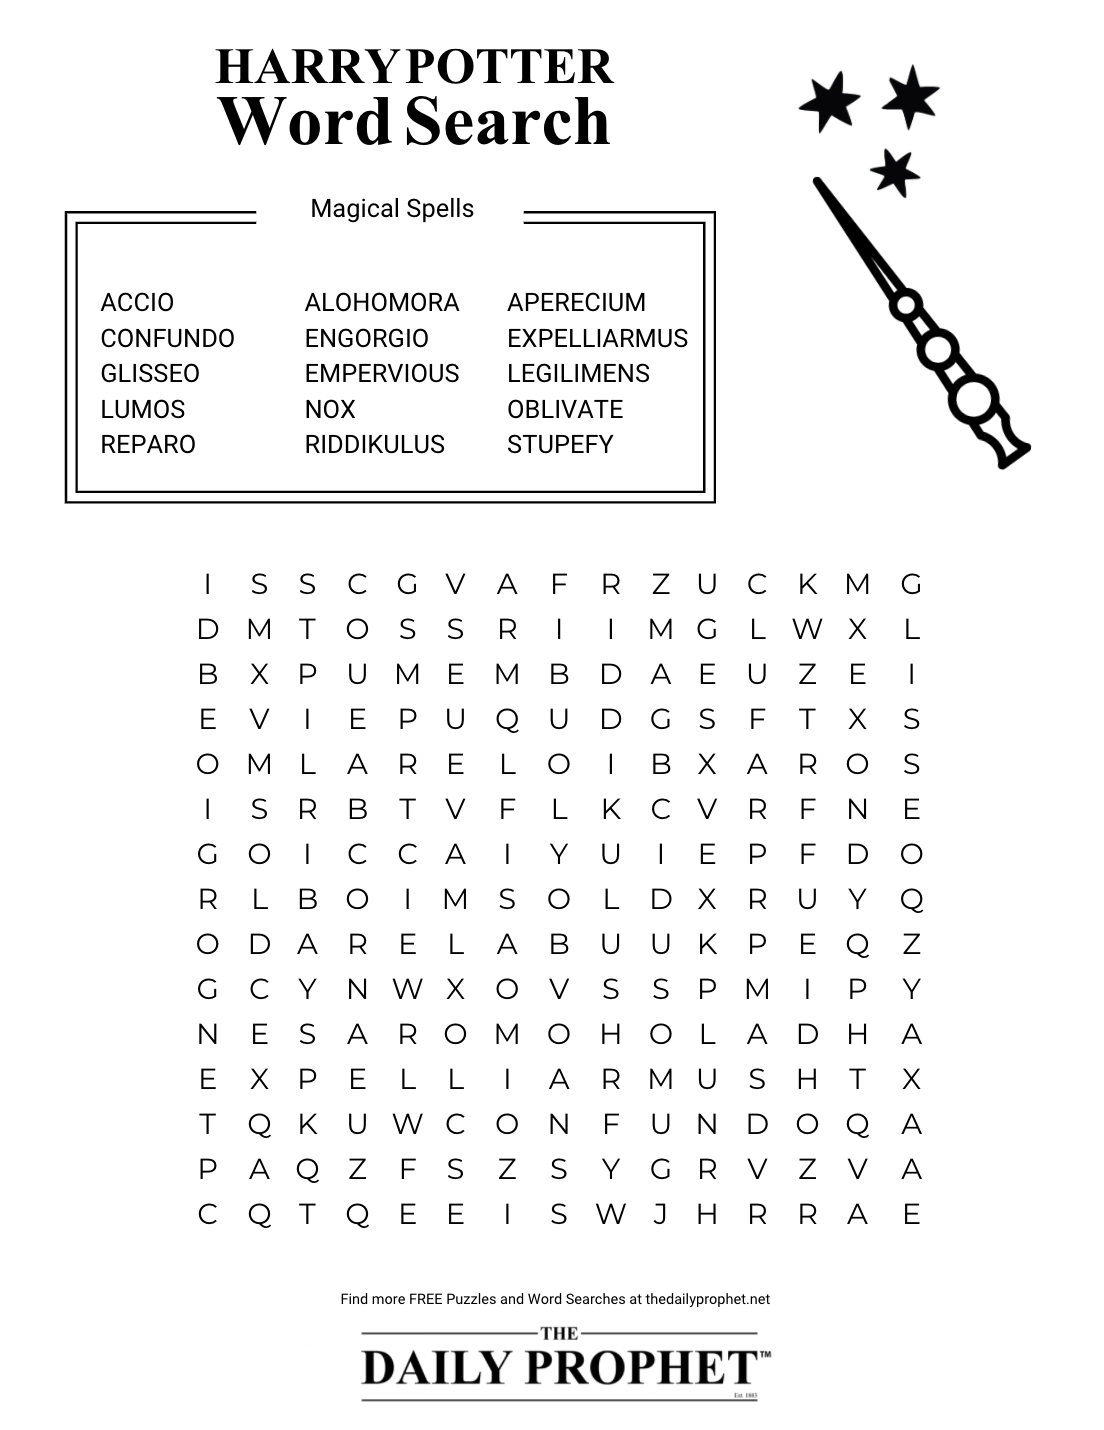 harry-potter-word-search-magical-spells-the-daily-prophet